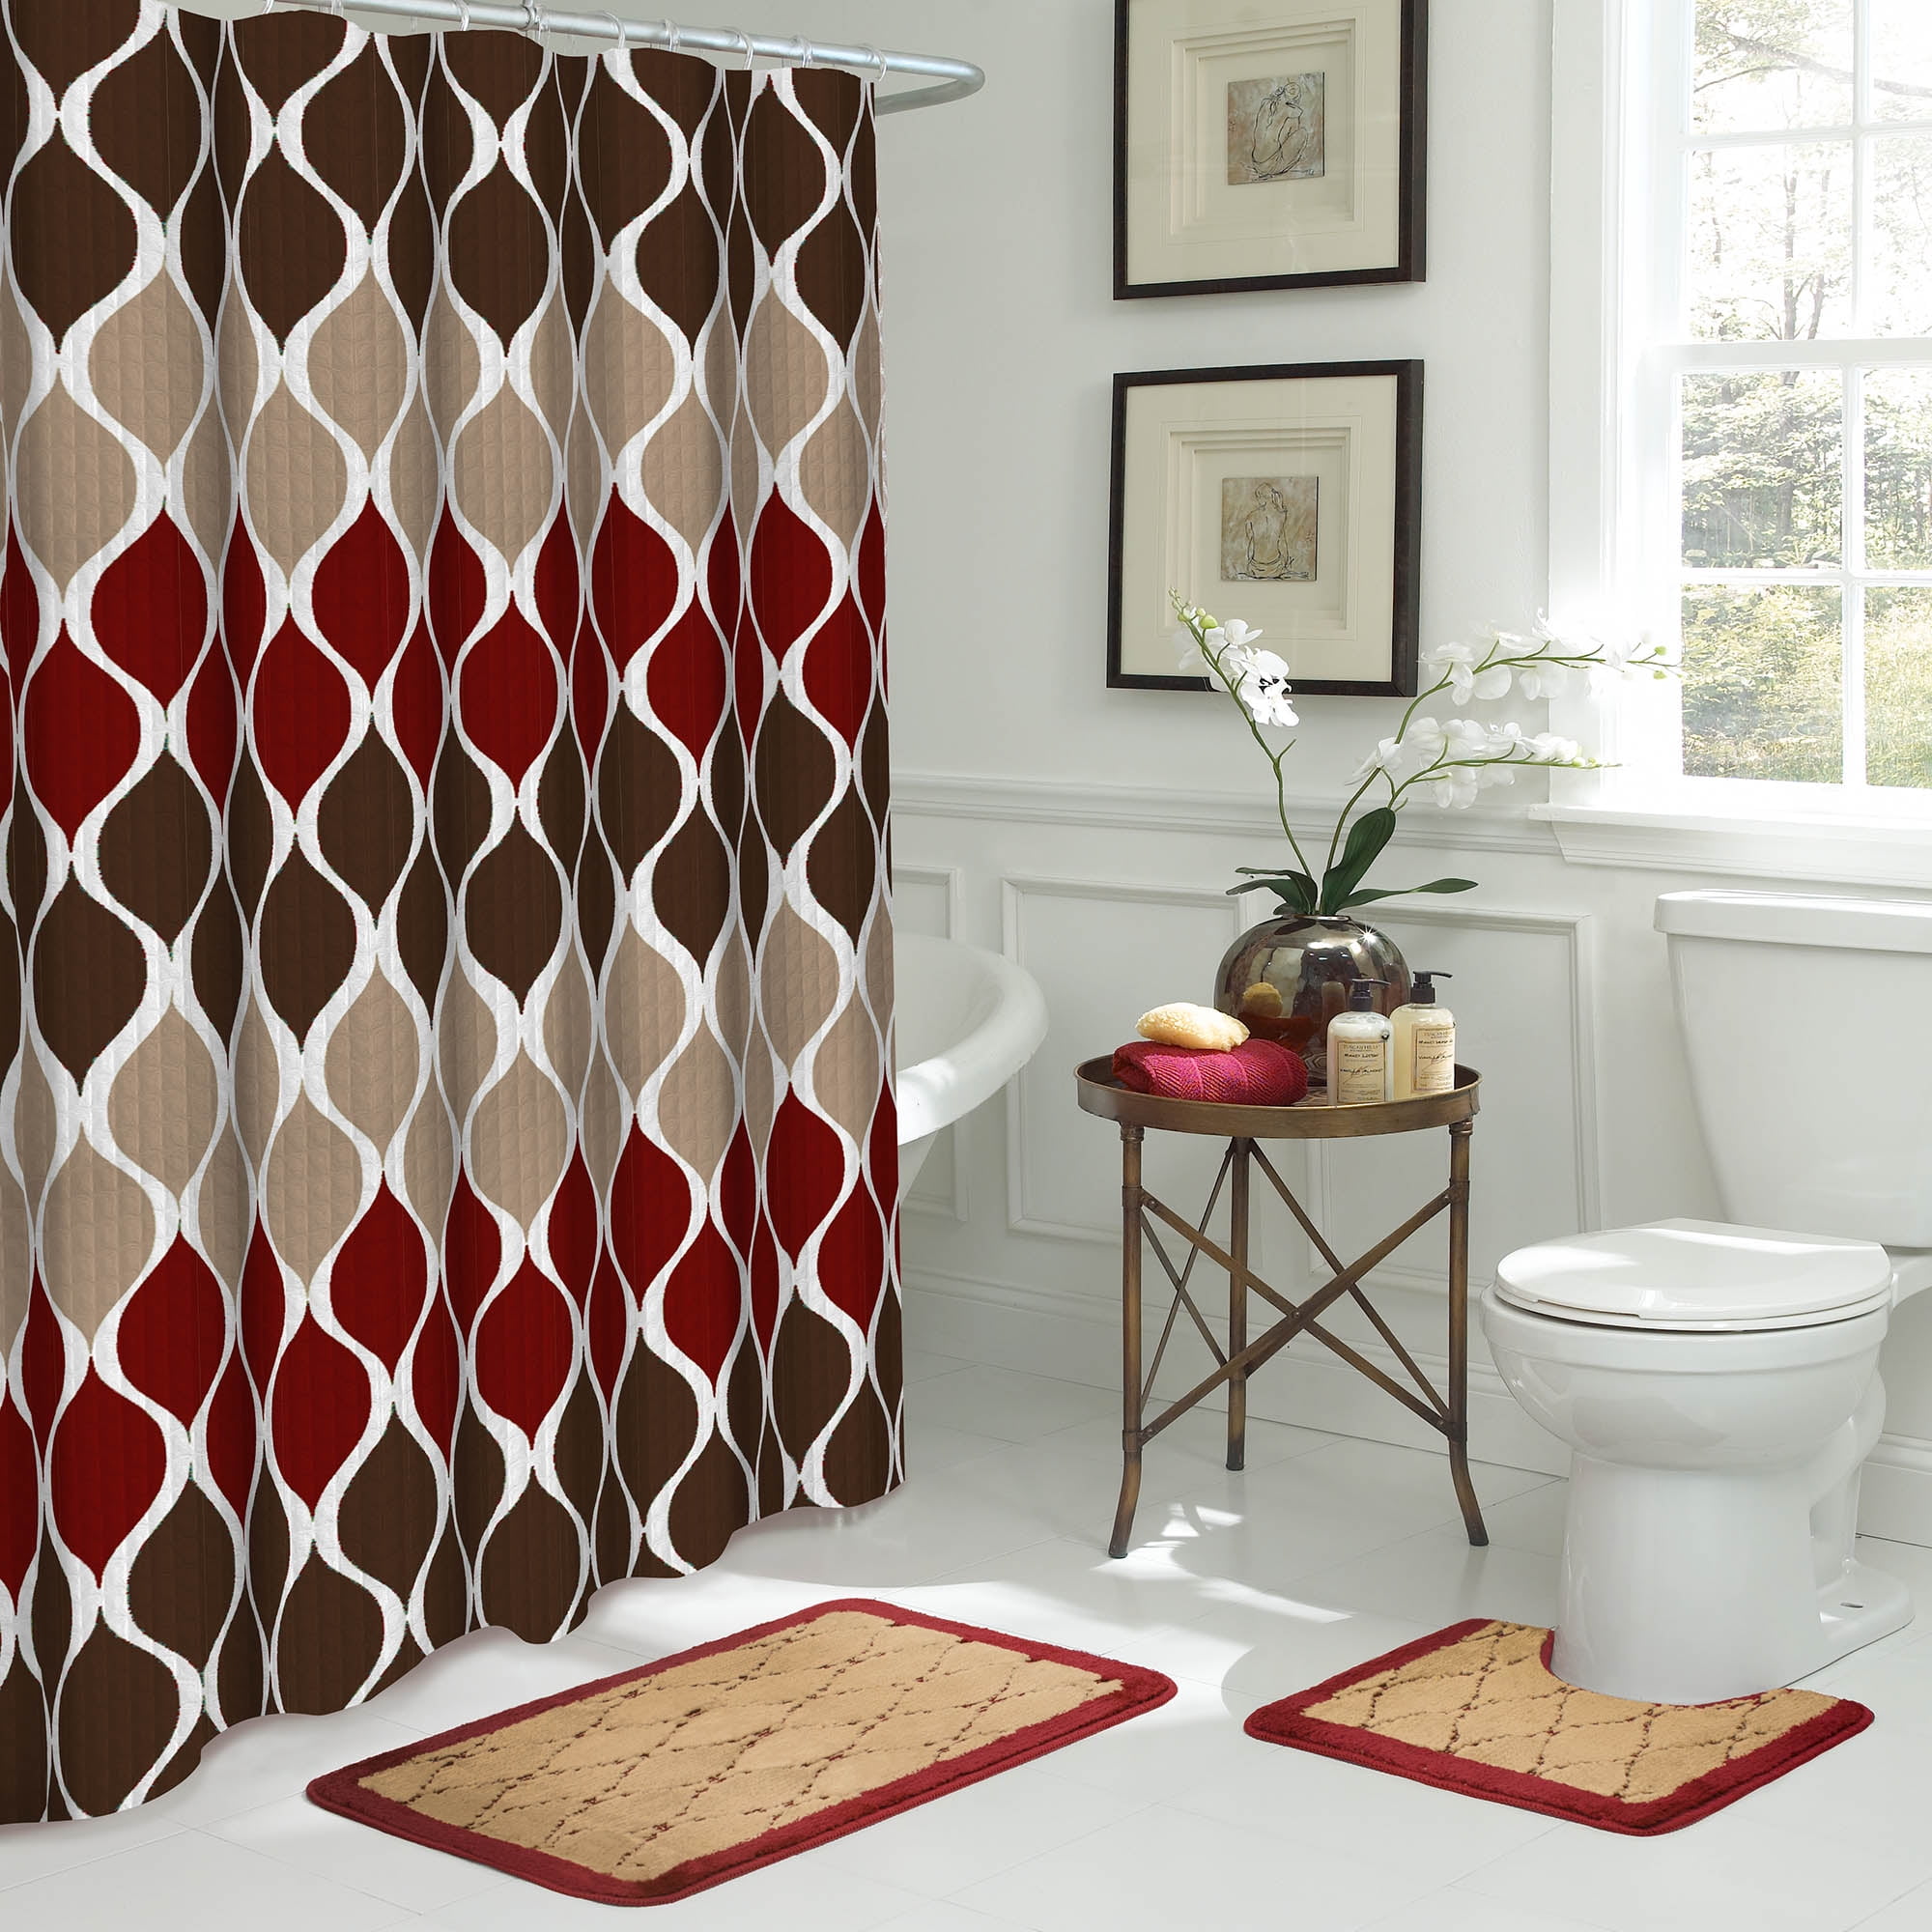 Details about   Rap Guitar and Stone Wall Fabric Shower Curtain Set 71in 12hooks & Bath Mat 